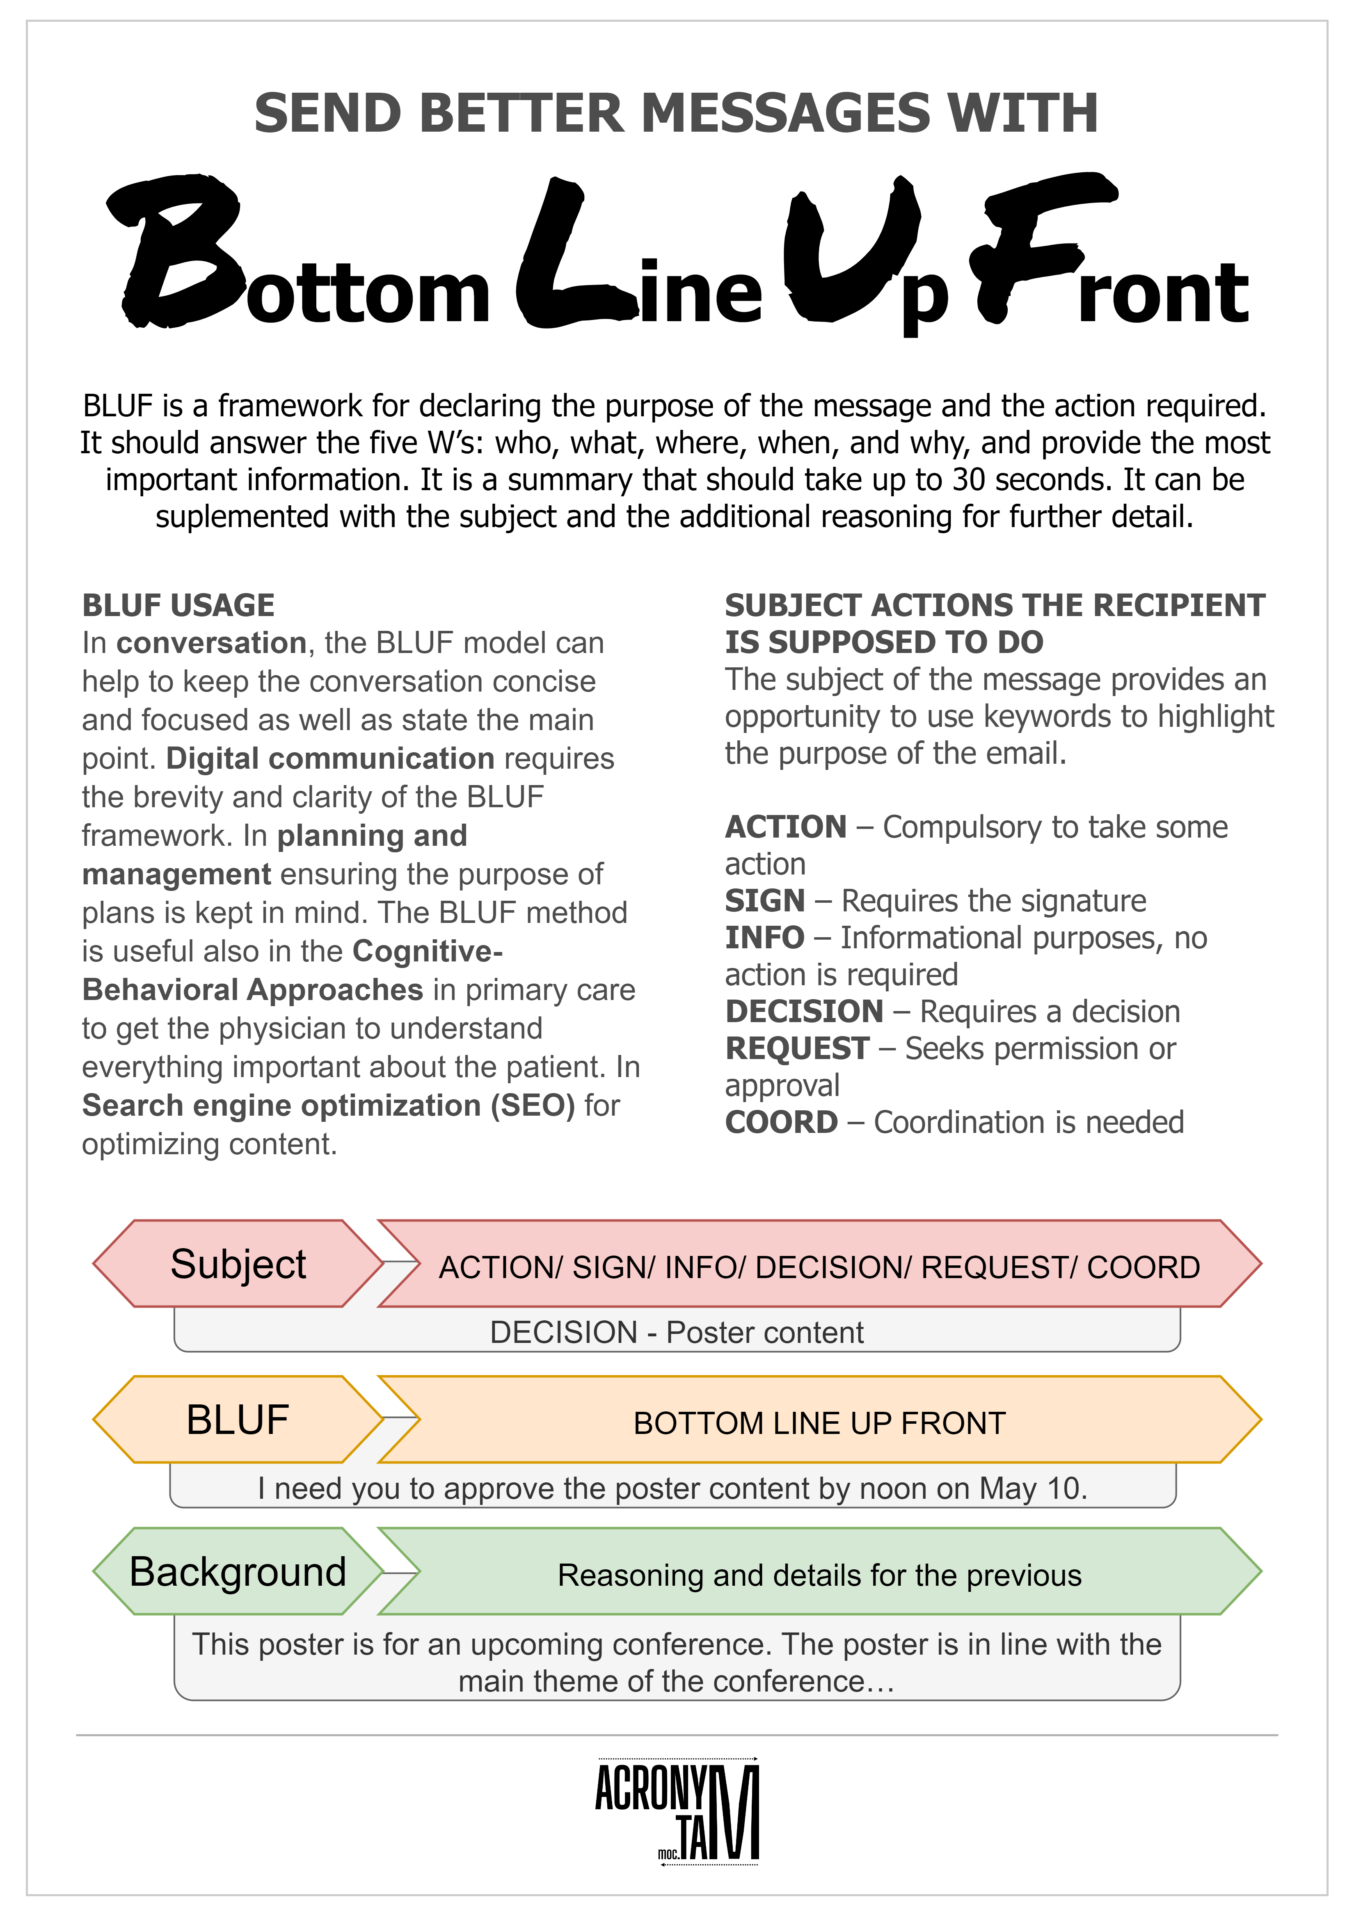 BLUF – Bottom Line Up Front